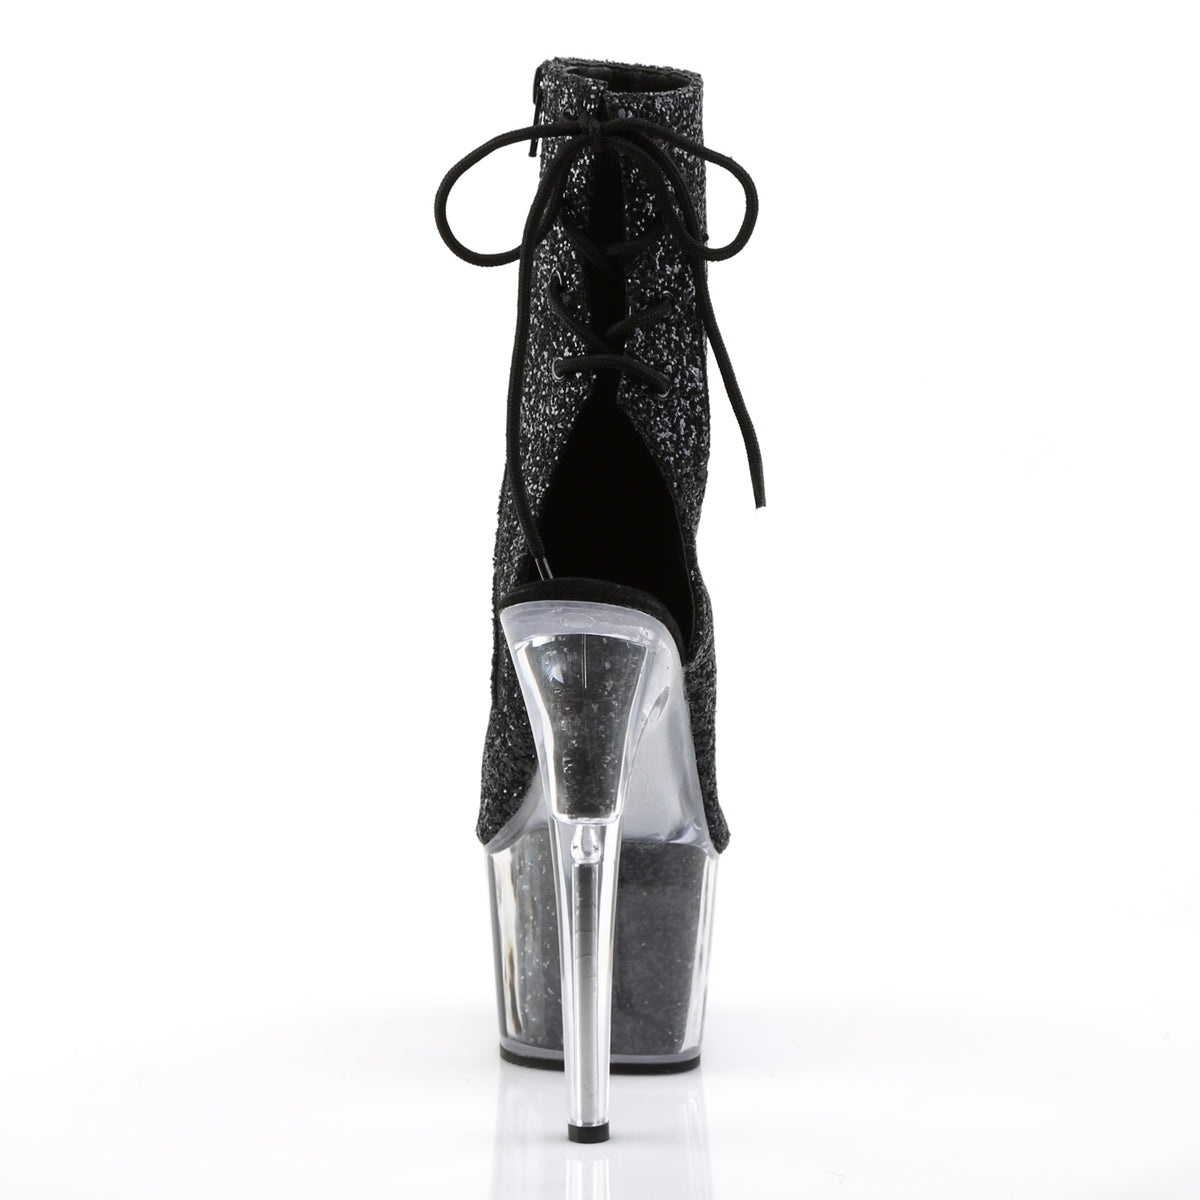 ADORE-1018G 7 Inch Heel Black Glitter Strippers Ankle Boots-Pleaser- Sexy Shoes Fetish Footwear